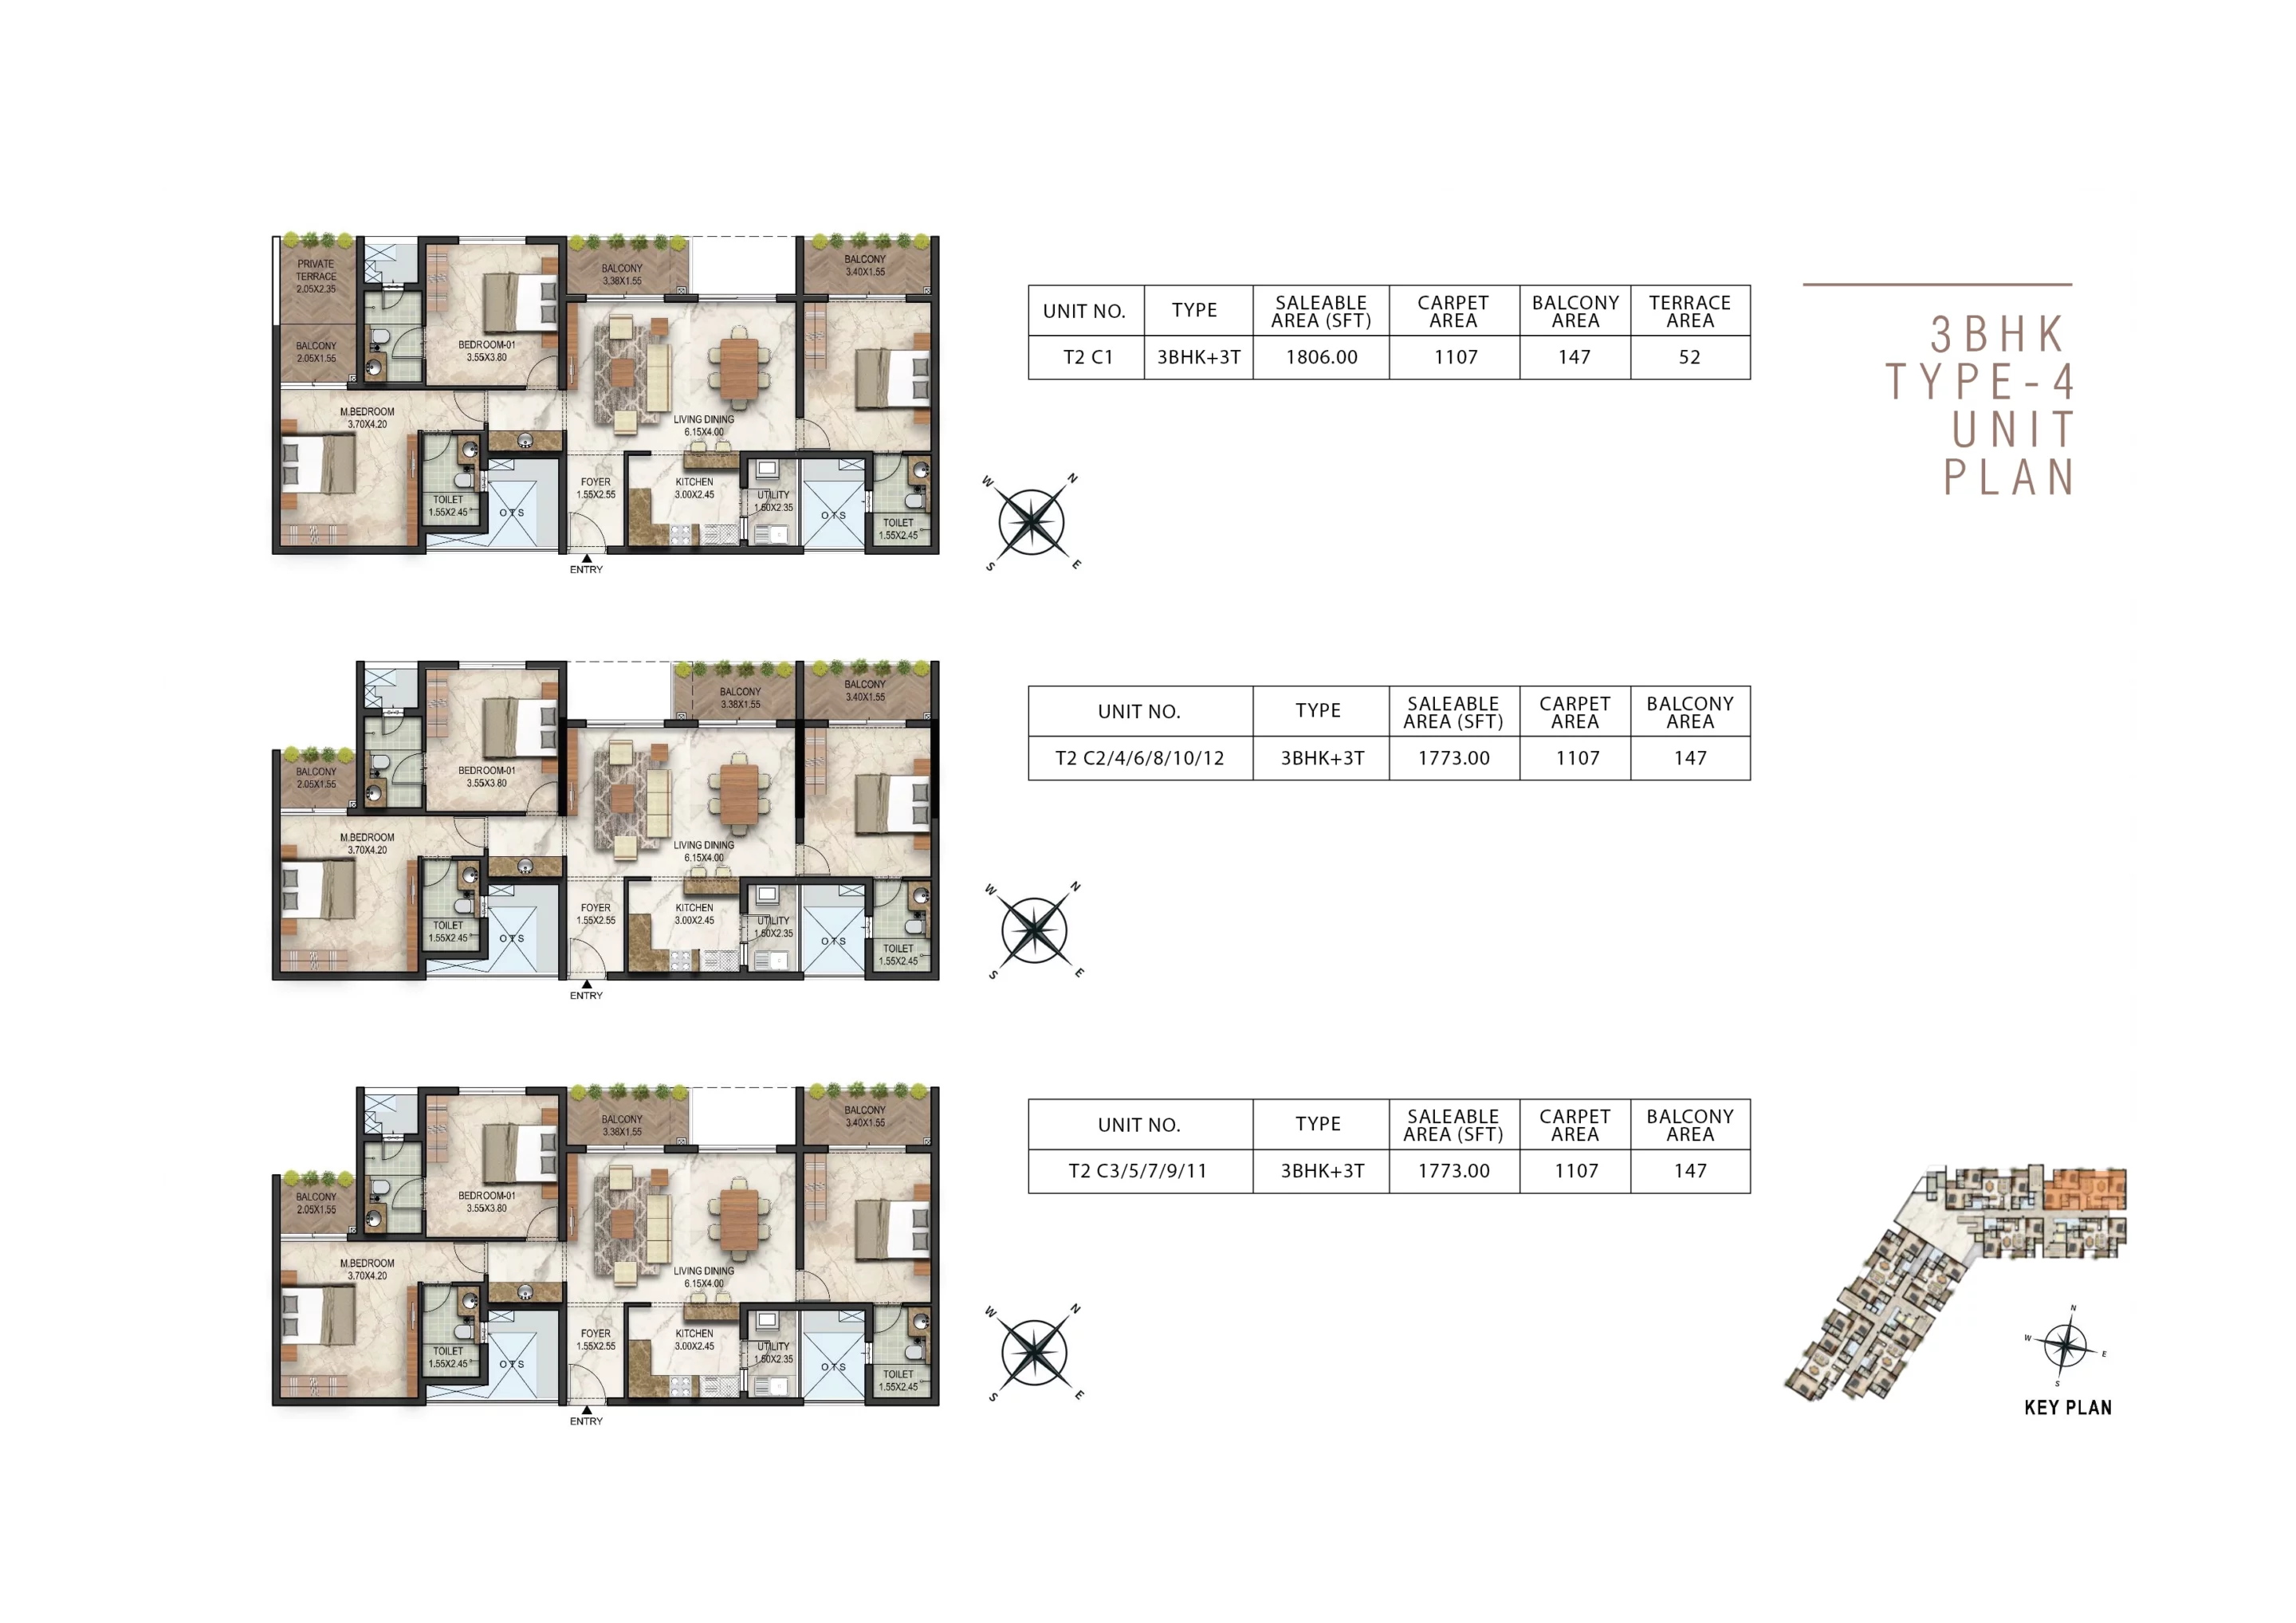 3 bhk type-4 unit plan with 3 toilets luxury apartment floor plan starting at 1800sqft in tower 2 with terrace area and balcony area in akkulam trivandrum